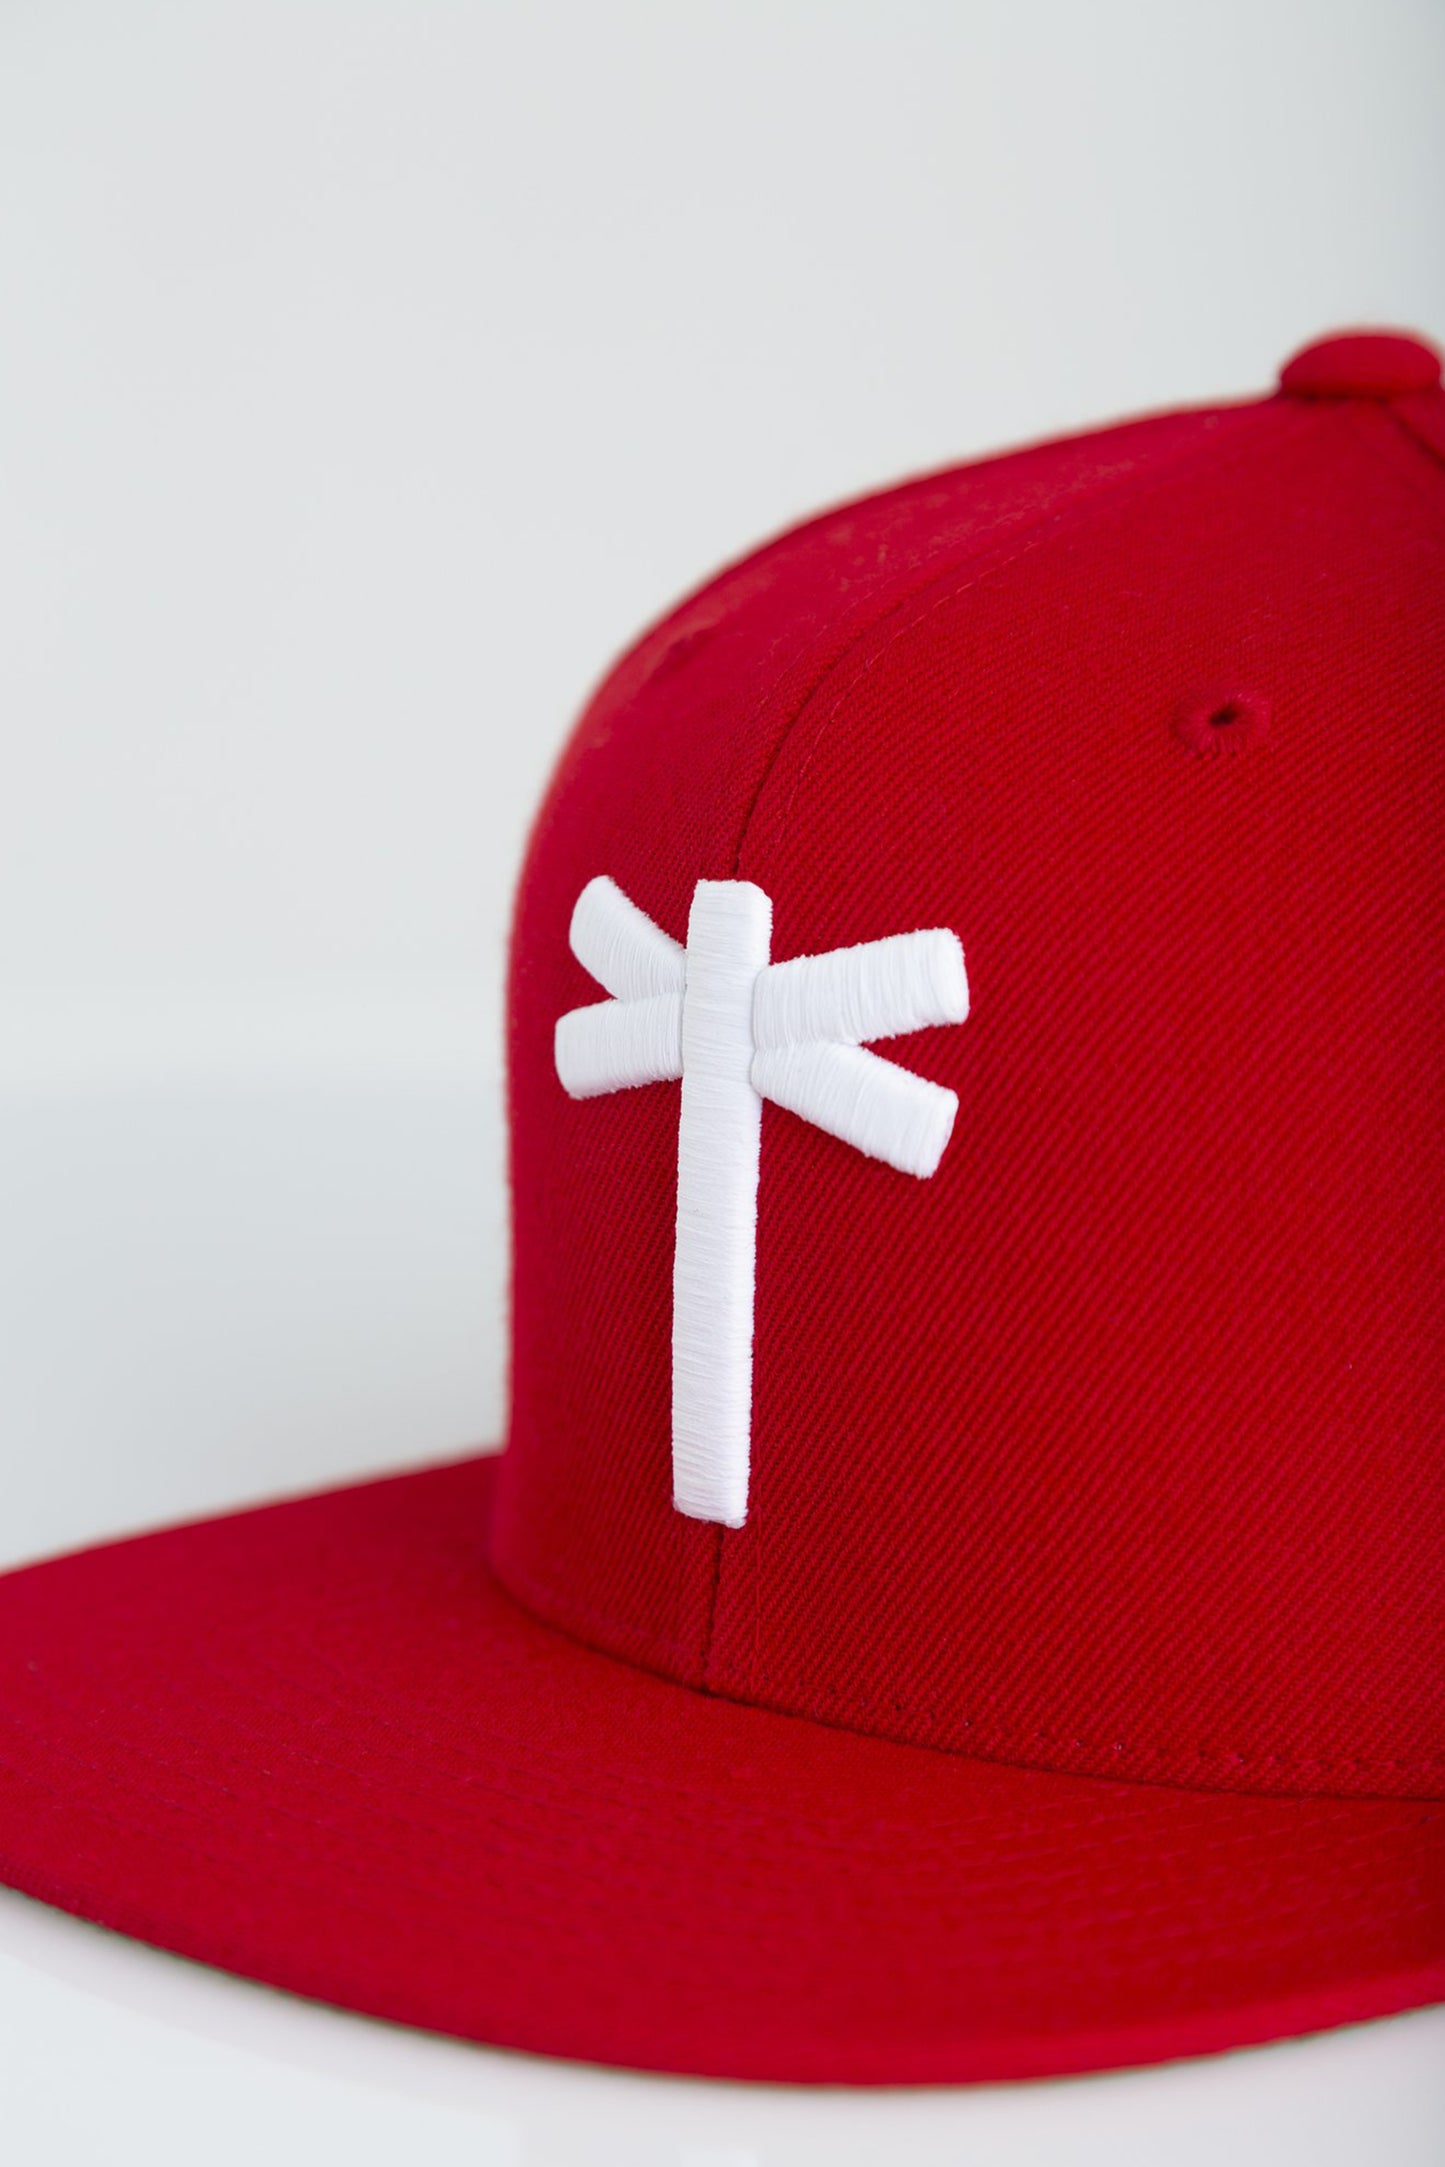 RED CLASSIC SNAPBACK